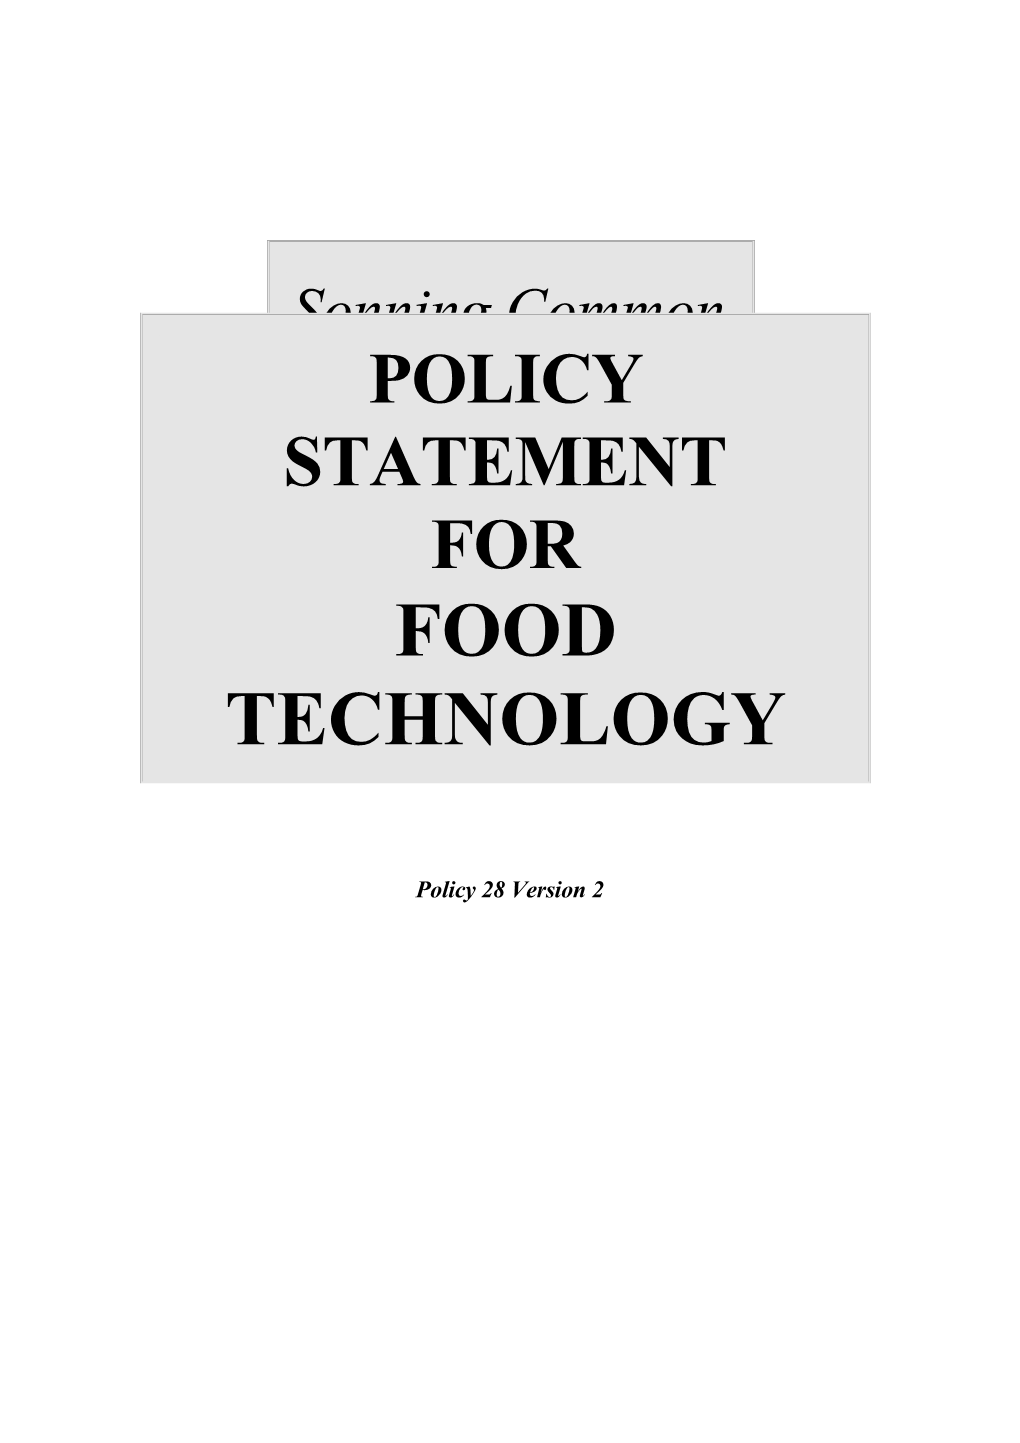 Food Technology Policy